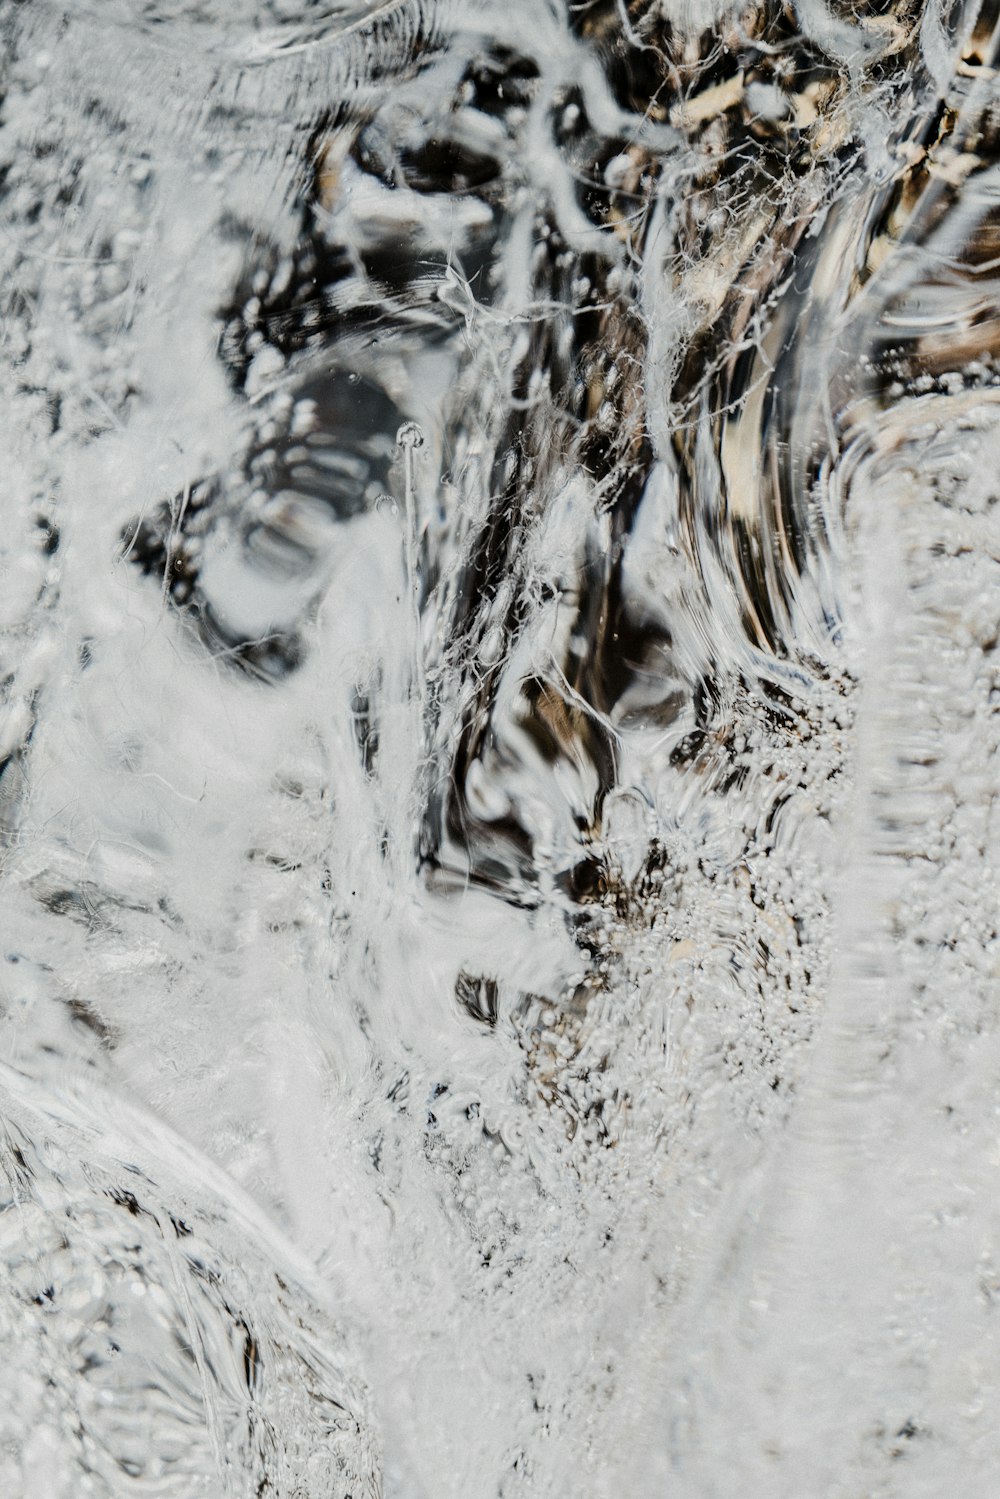 a close up view of water and ice